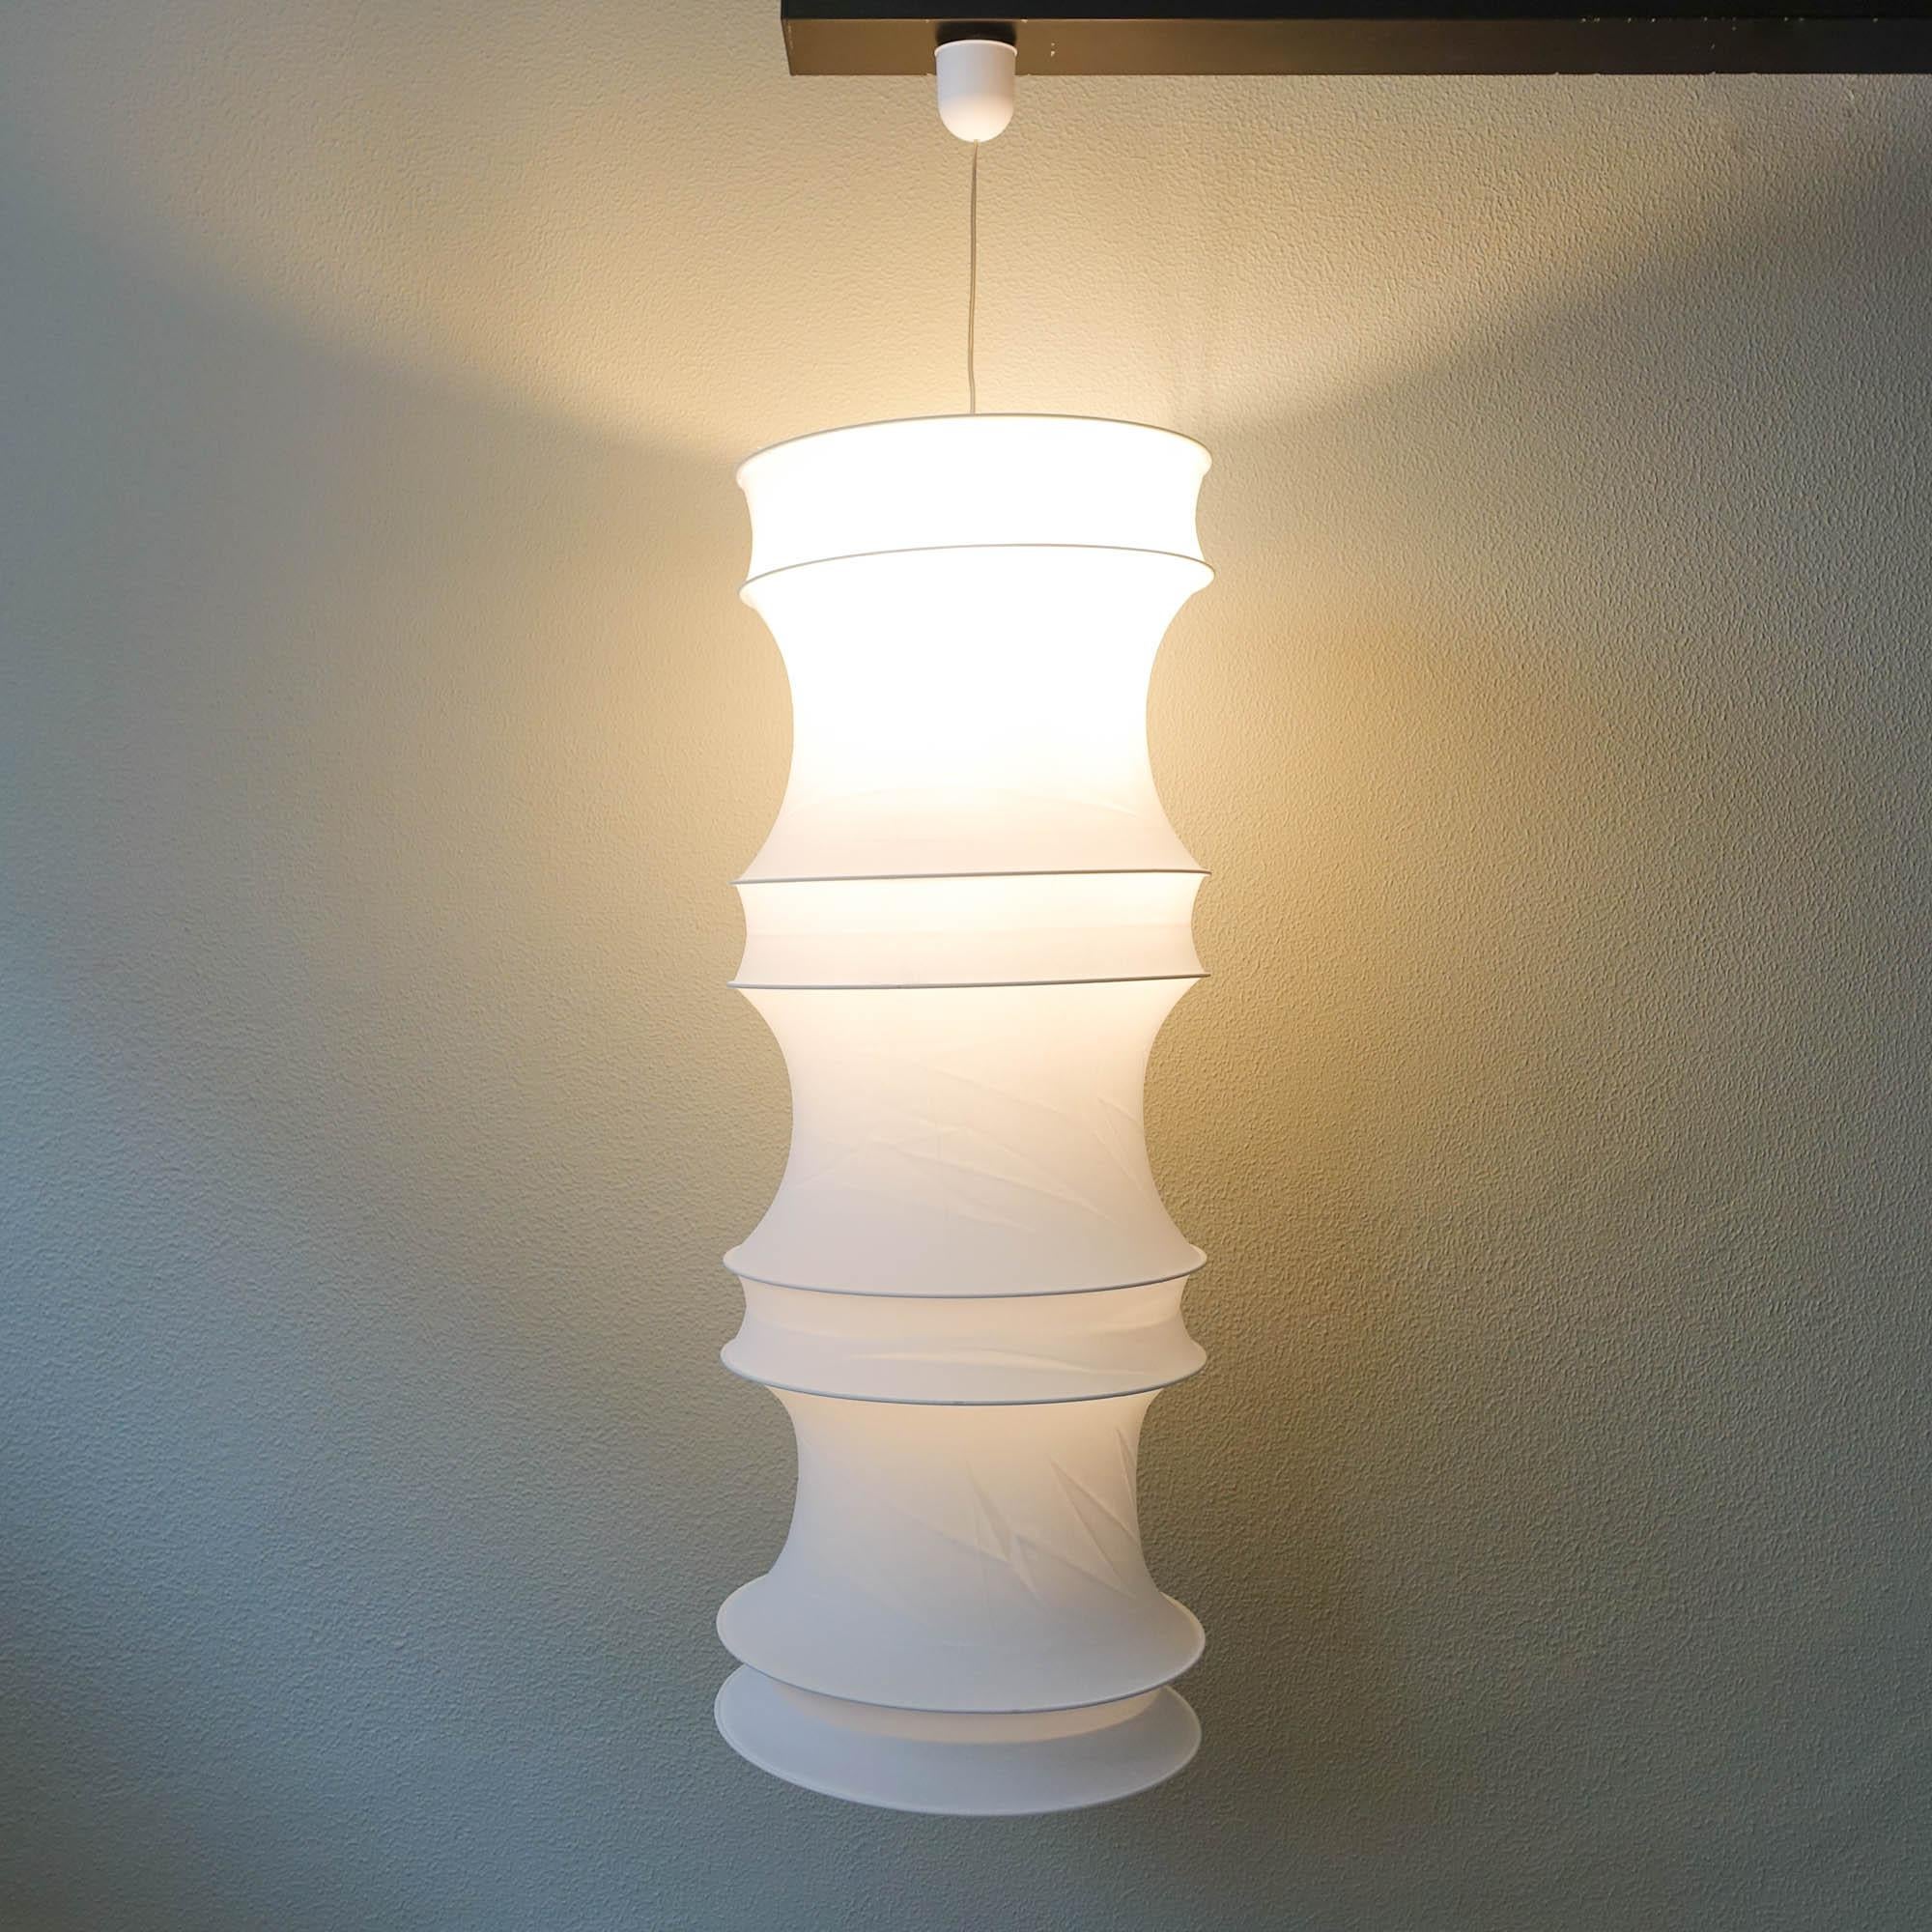 This ceiling lamp, model Osaka, was designed and produced by Frandsen Lyskilde between 1993 and 1996, in Denmark. The lamp features a stretchable white fabric were some metal rings are attached to give the organic shape. It can be folded and be a